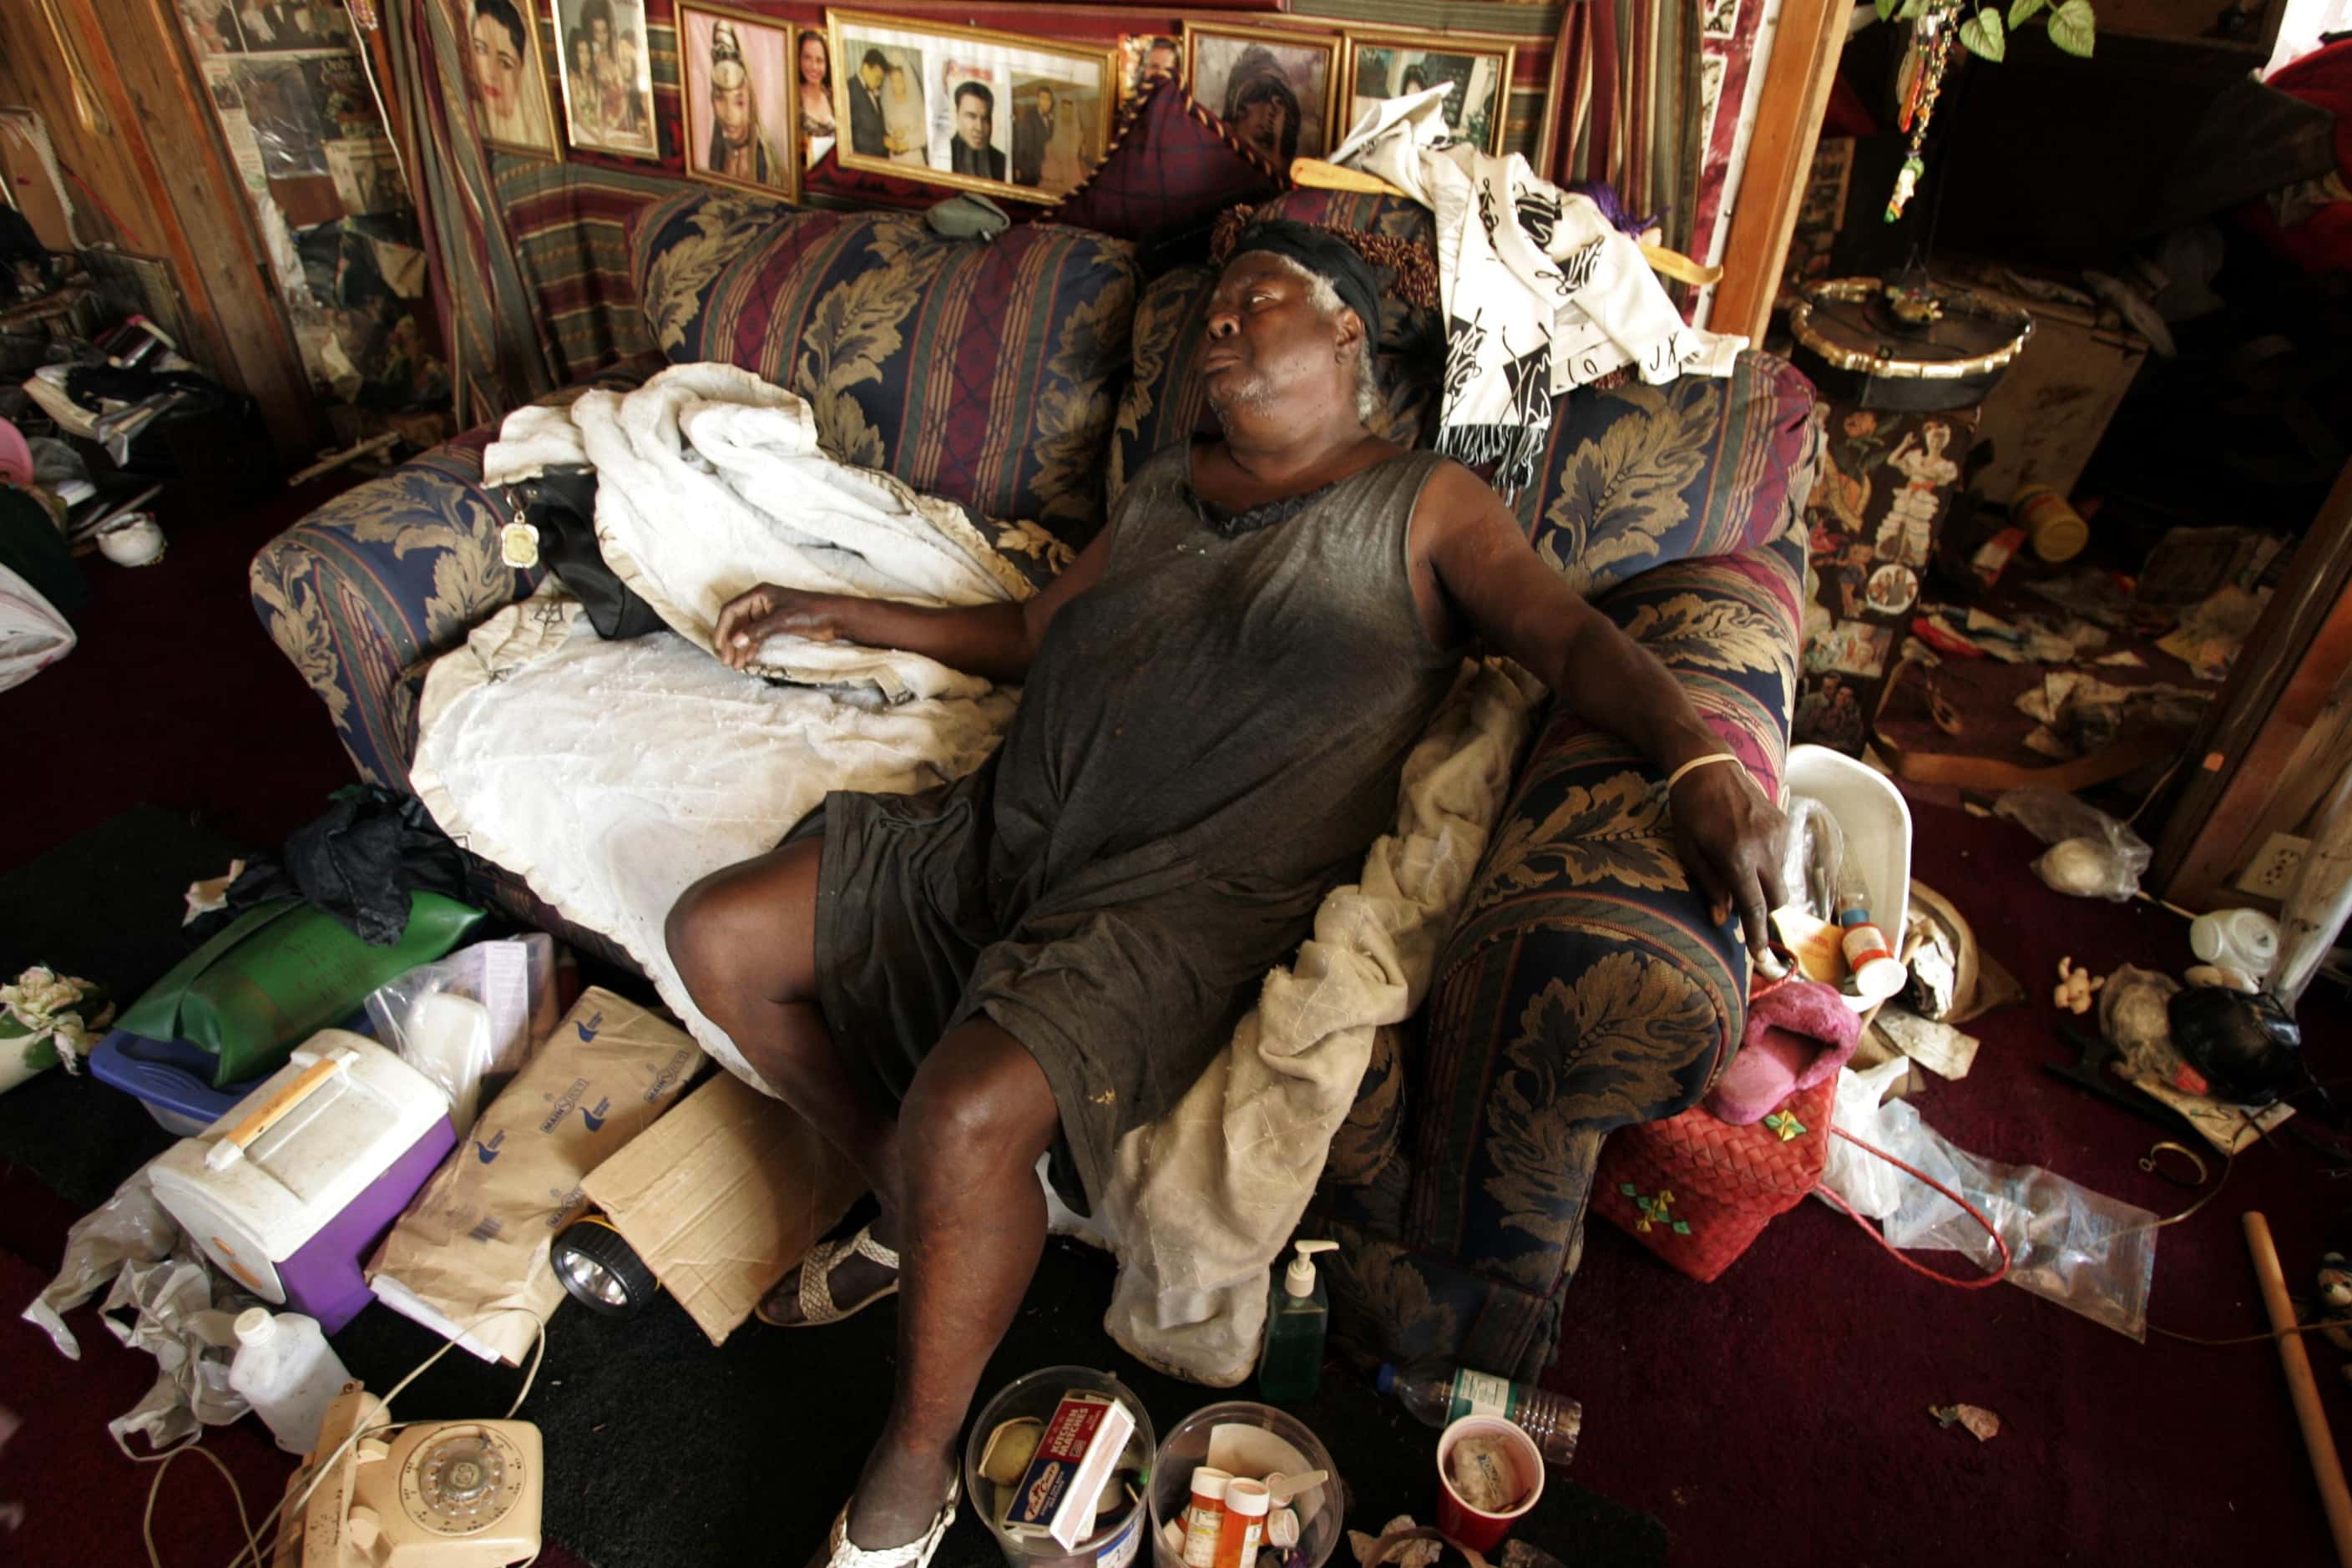 Eddie Mae Smith, 75, collapsed in her home, which was flooded by Hurricane Katrina and...